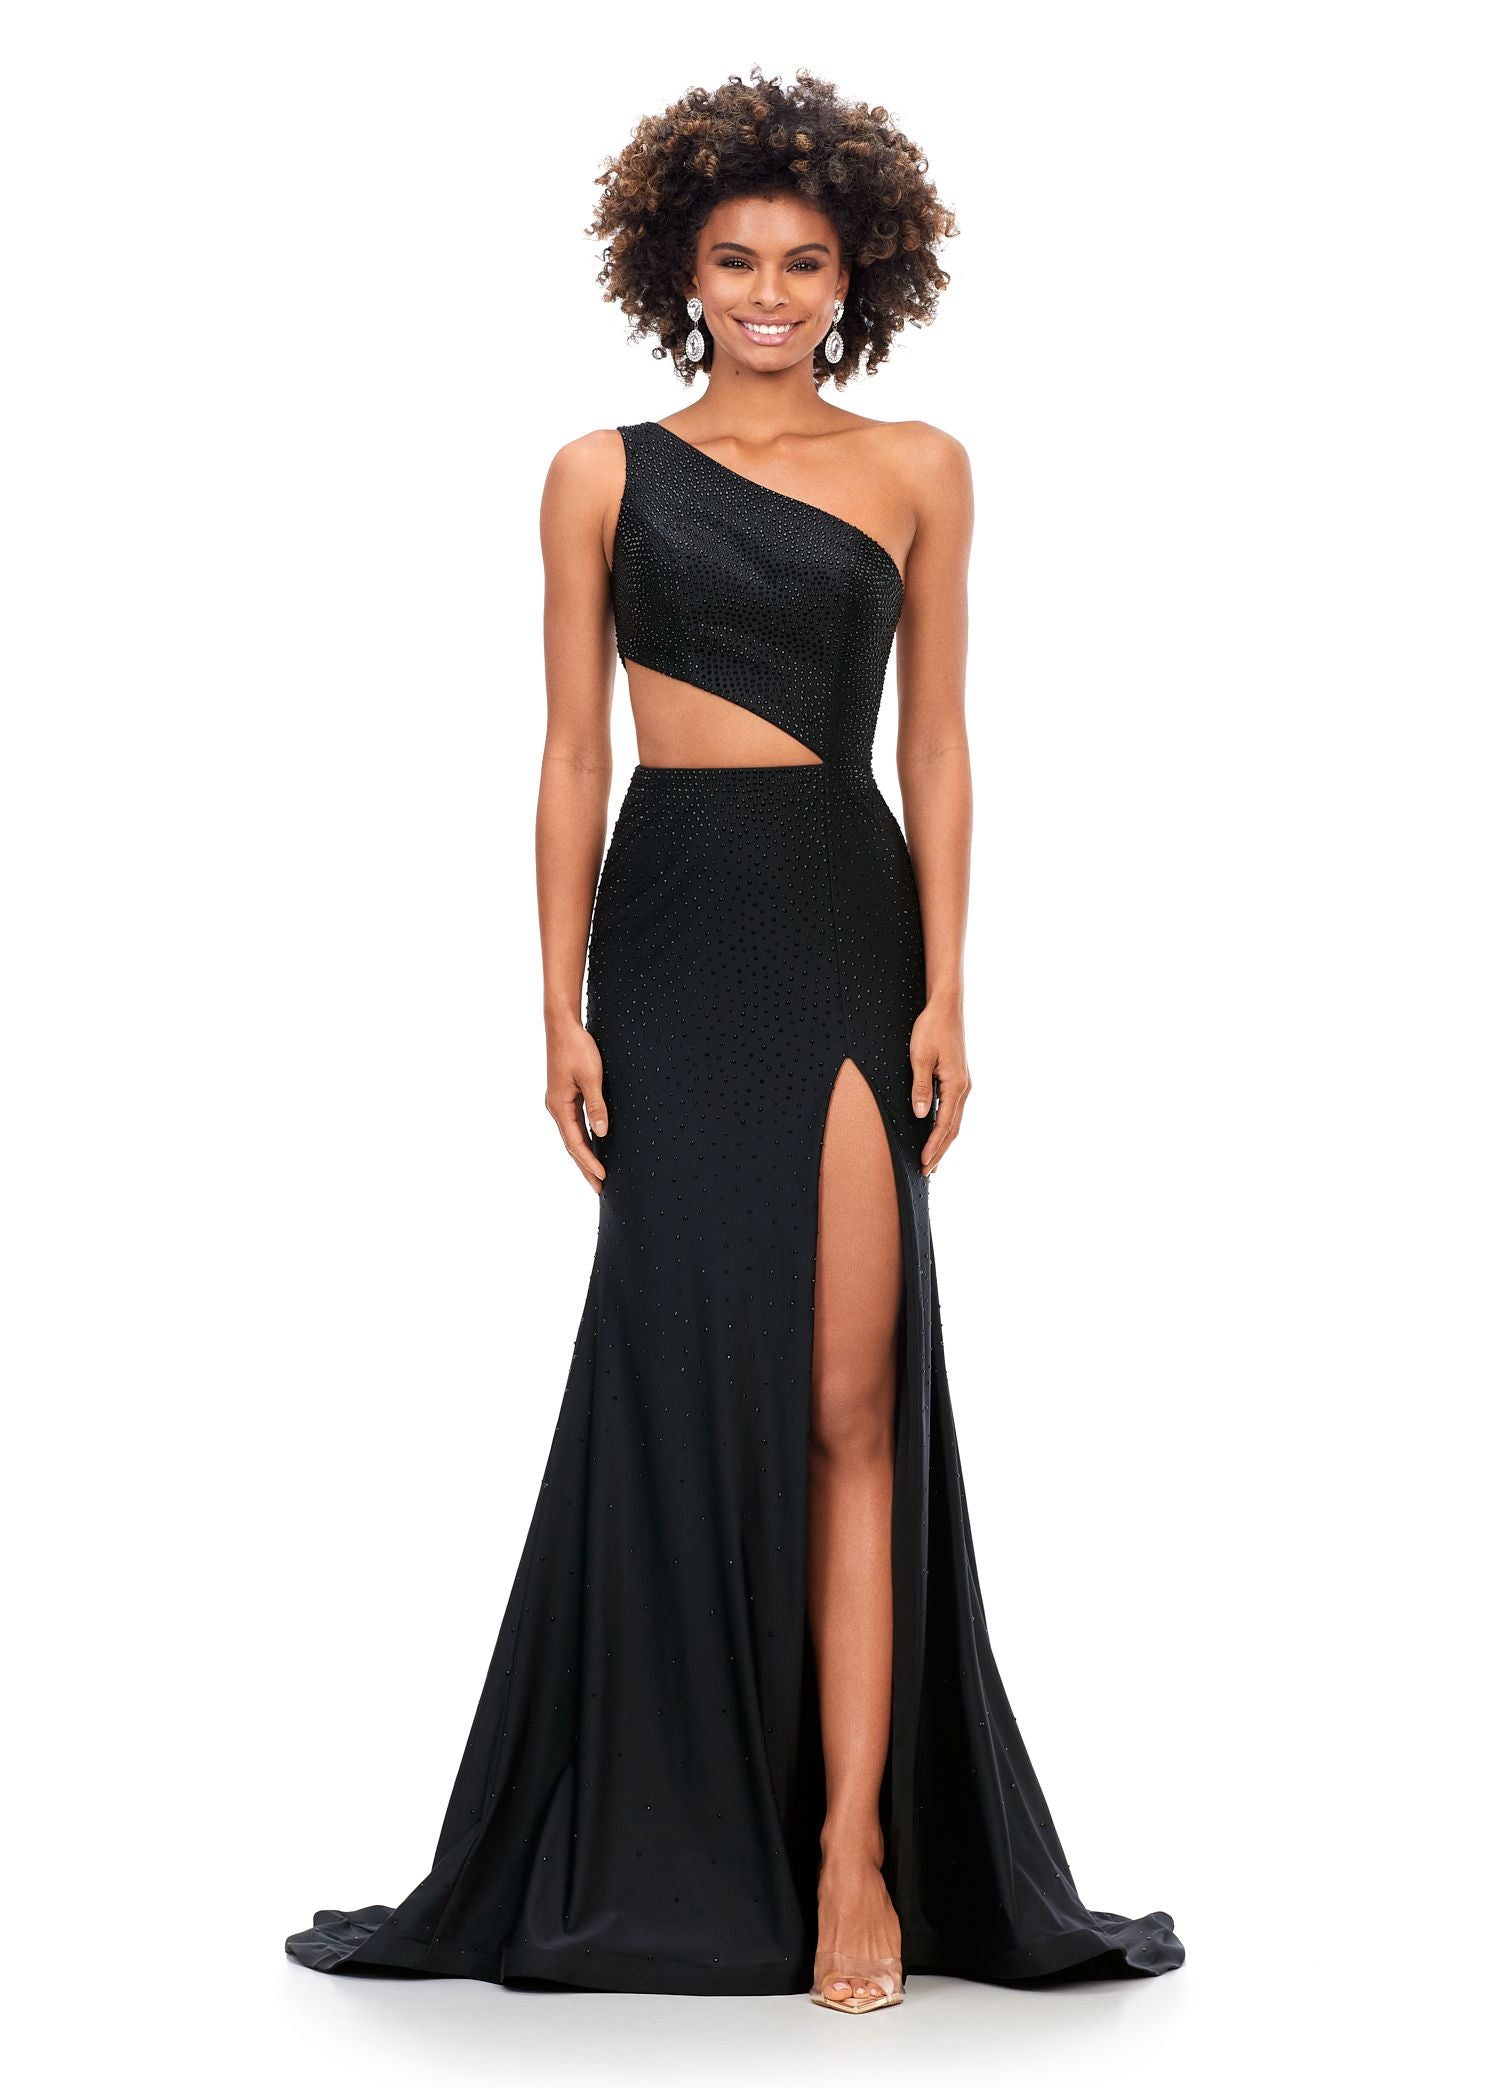 Ashley Lauren 11337 Stand out in this fitted one shoulder jersey gown embellished with heat set stones. The look is complete with an asymmetrical sharkbite cut out and left leg slit. One Shoulder Cut Out Heat Set Stones Jersey COLORS: Hot Pink, Turquoise, Black, Red, Violet